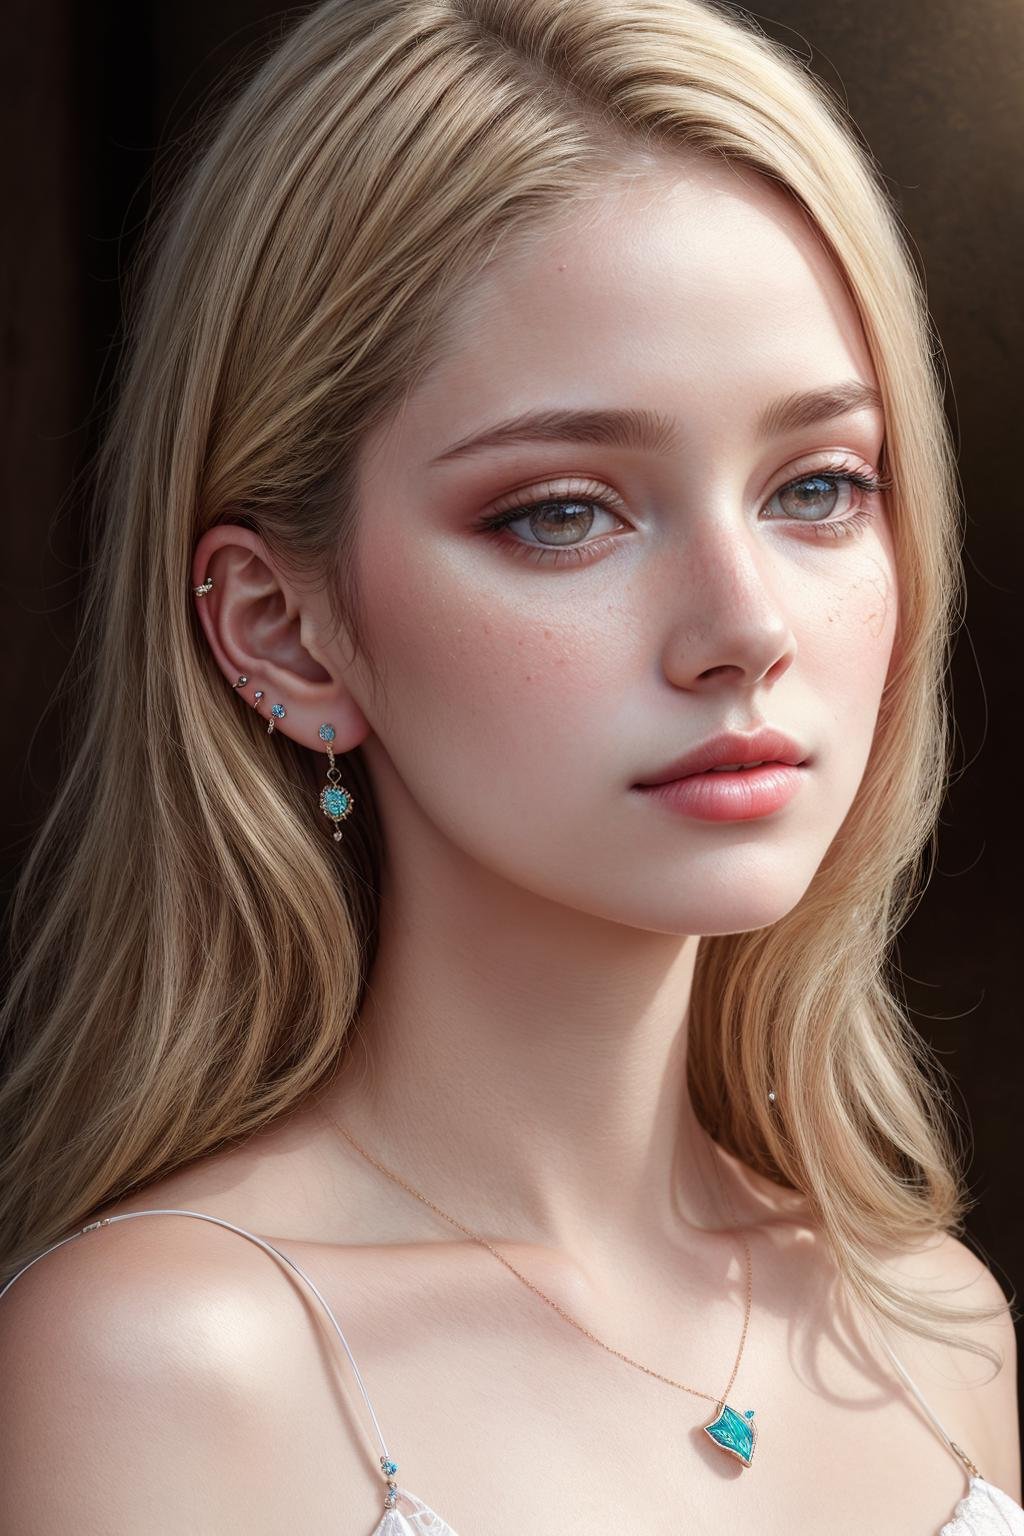 ((Masterpiece, best quality,photography, detailed skin, realistic, photo-realistic, 8k, highly detailed, full length frame, High detail RAW color art, diffused soft lighting, shallow depth of field, sharp focus, hyperrealism, cinematic lighting,close up)),edgEarPiercing, blonde woman,  solo,1girl, piercing, ring, heart shaped ear piercing, wearing edgEarPiercing, <lora:edgEarP_LoRA:0.7>